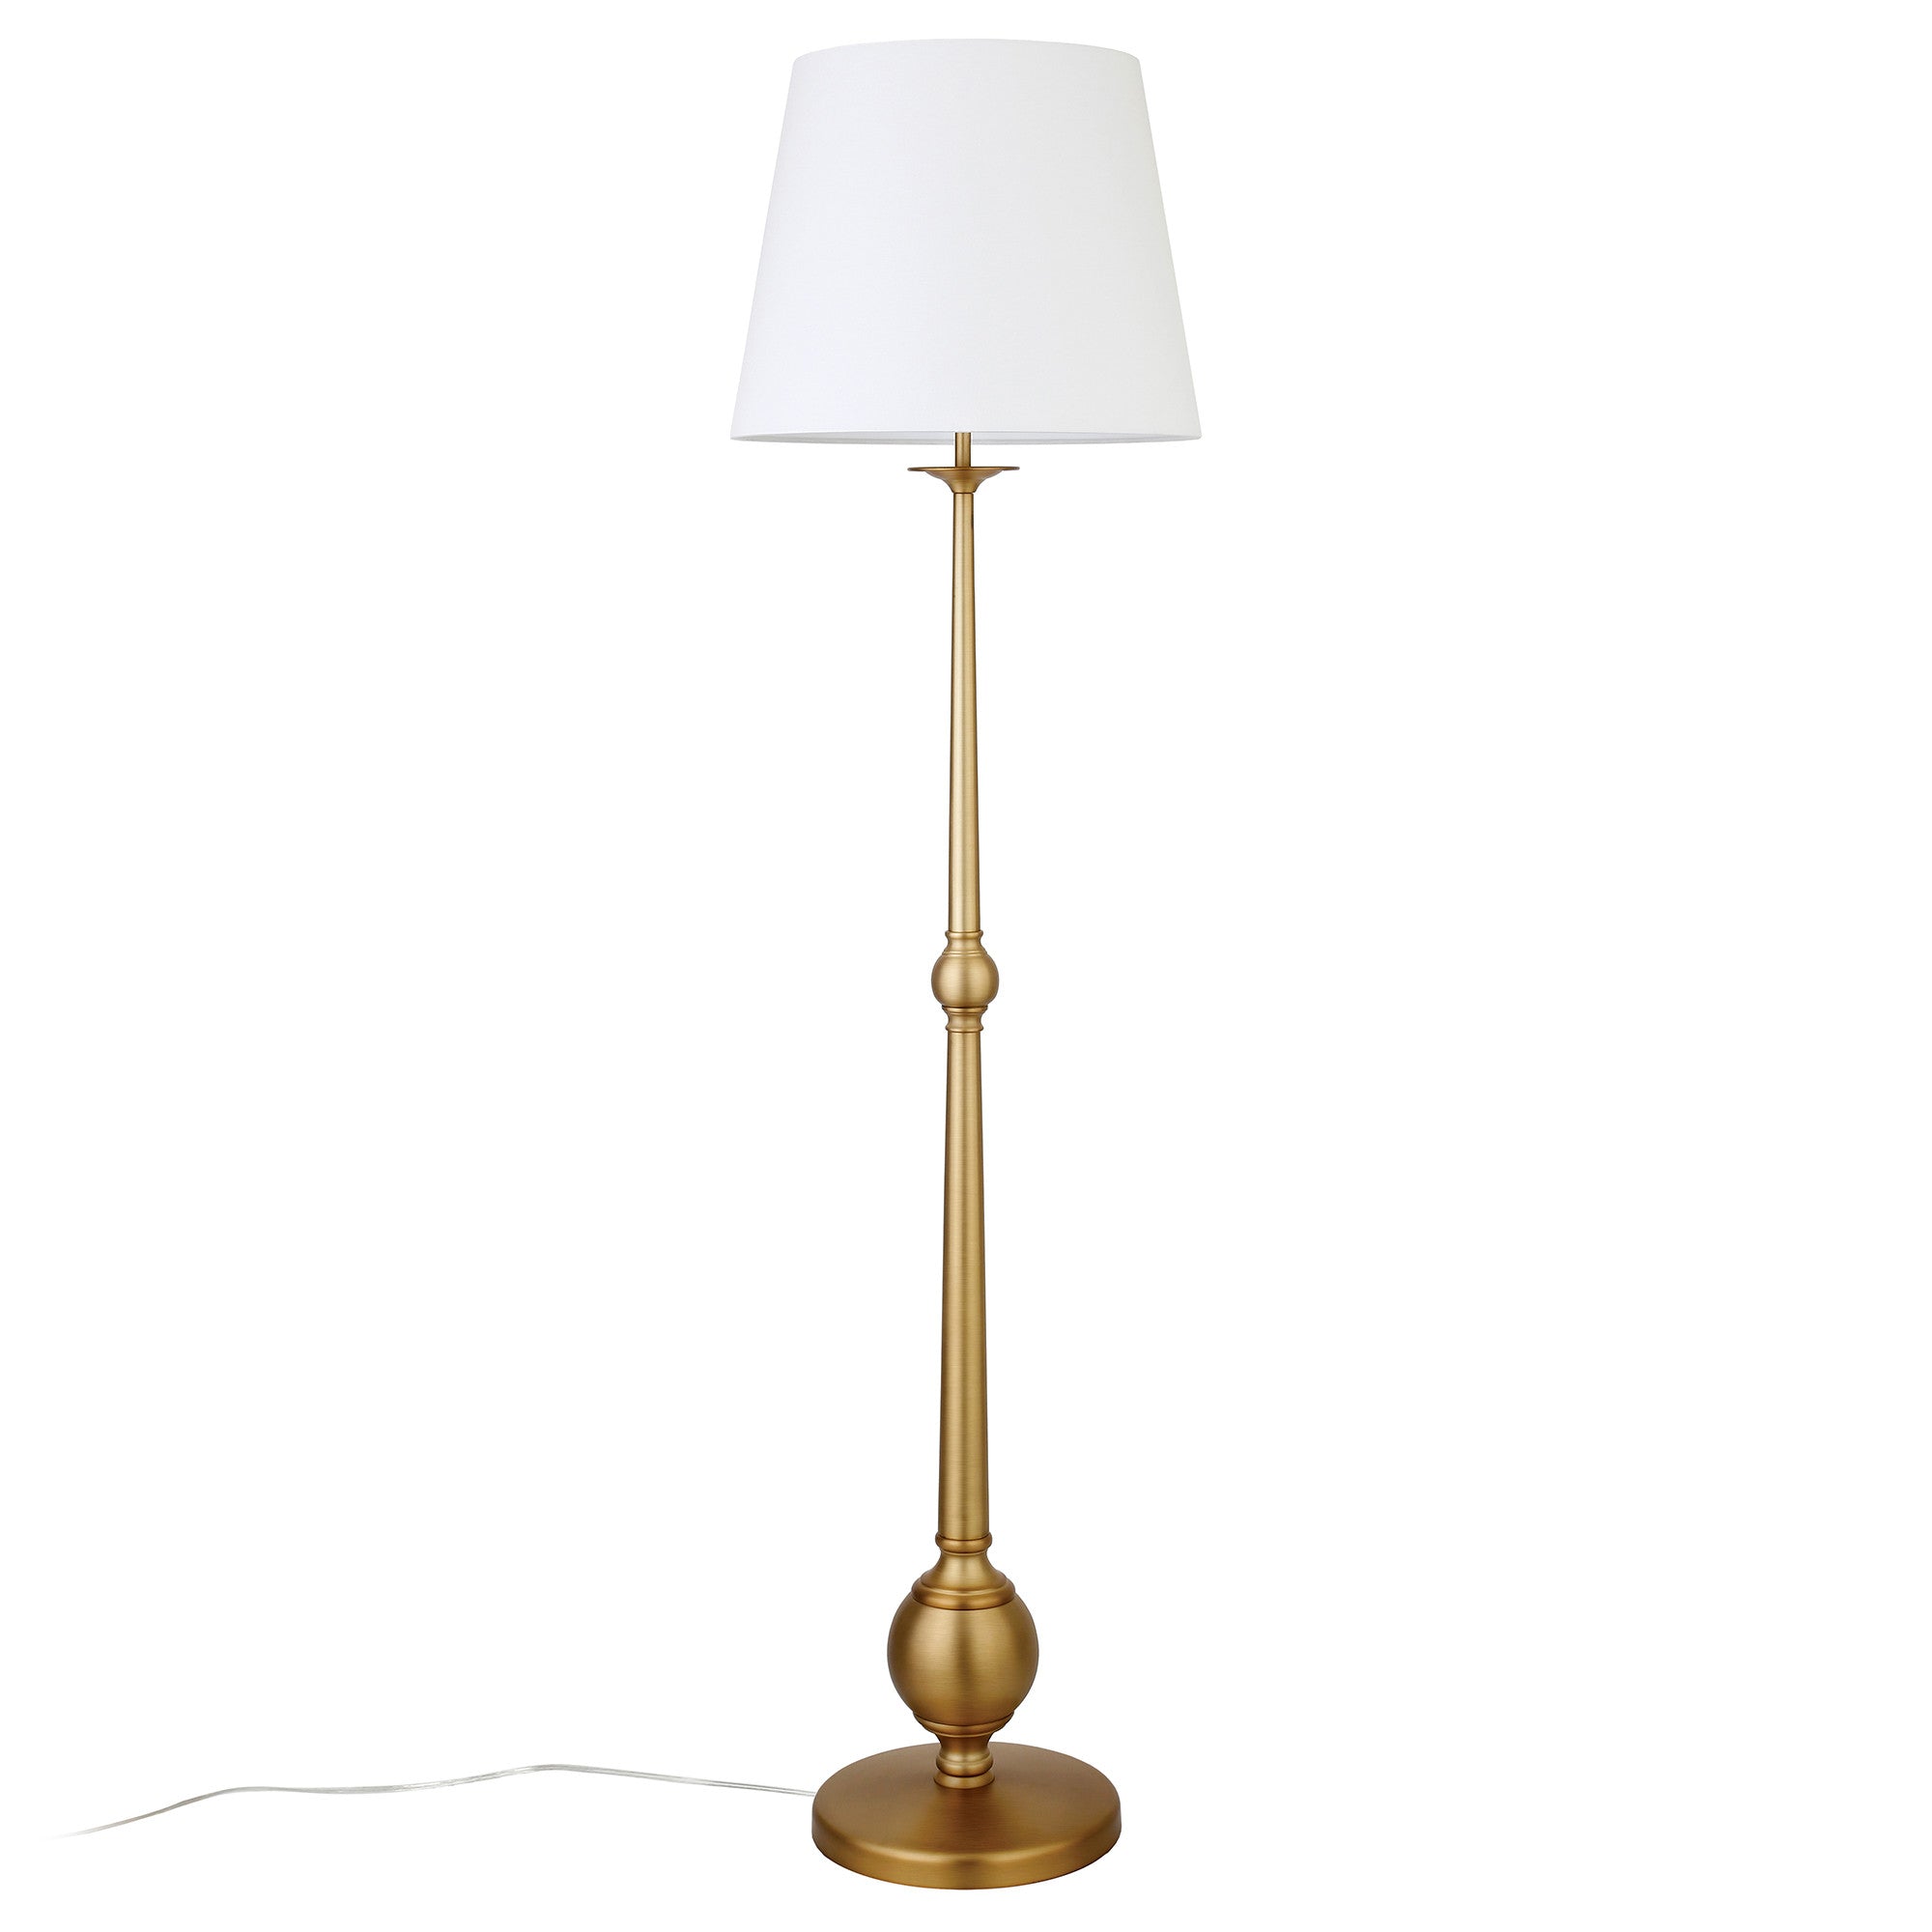 68" Brass Traditional Shaped Floor Lamp With White Frosted Glass Drum Shade